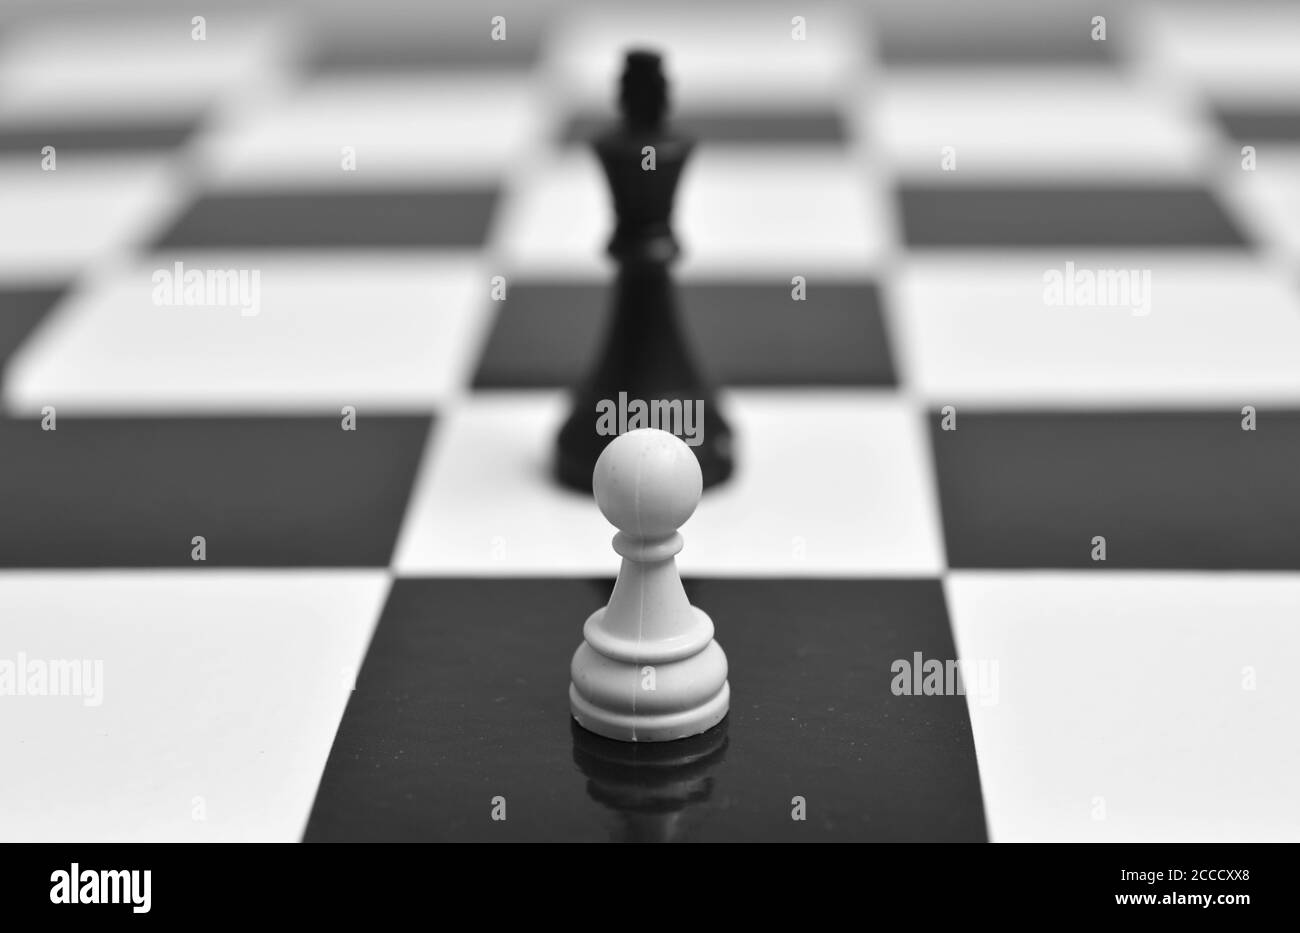 image shows a white pawn standing up to a black king. Image symbolizes bravery and sacrifice as the white pawn will likely be killed in the next move. Stock Photo